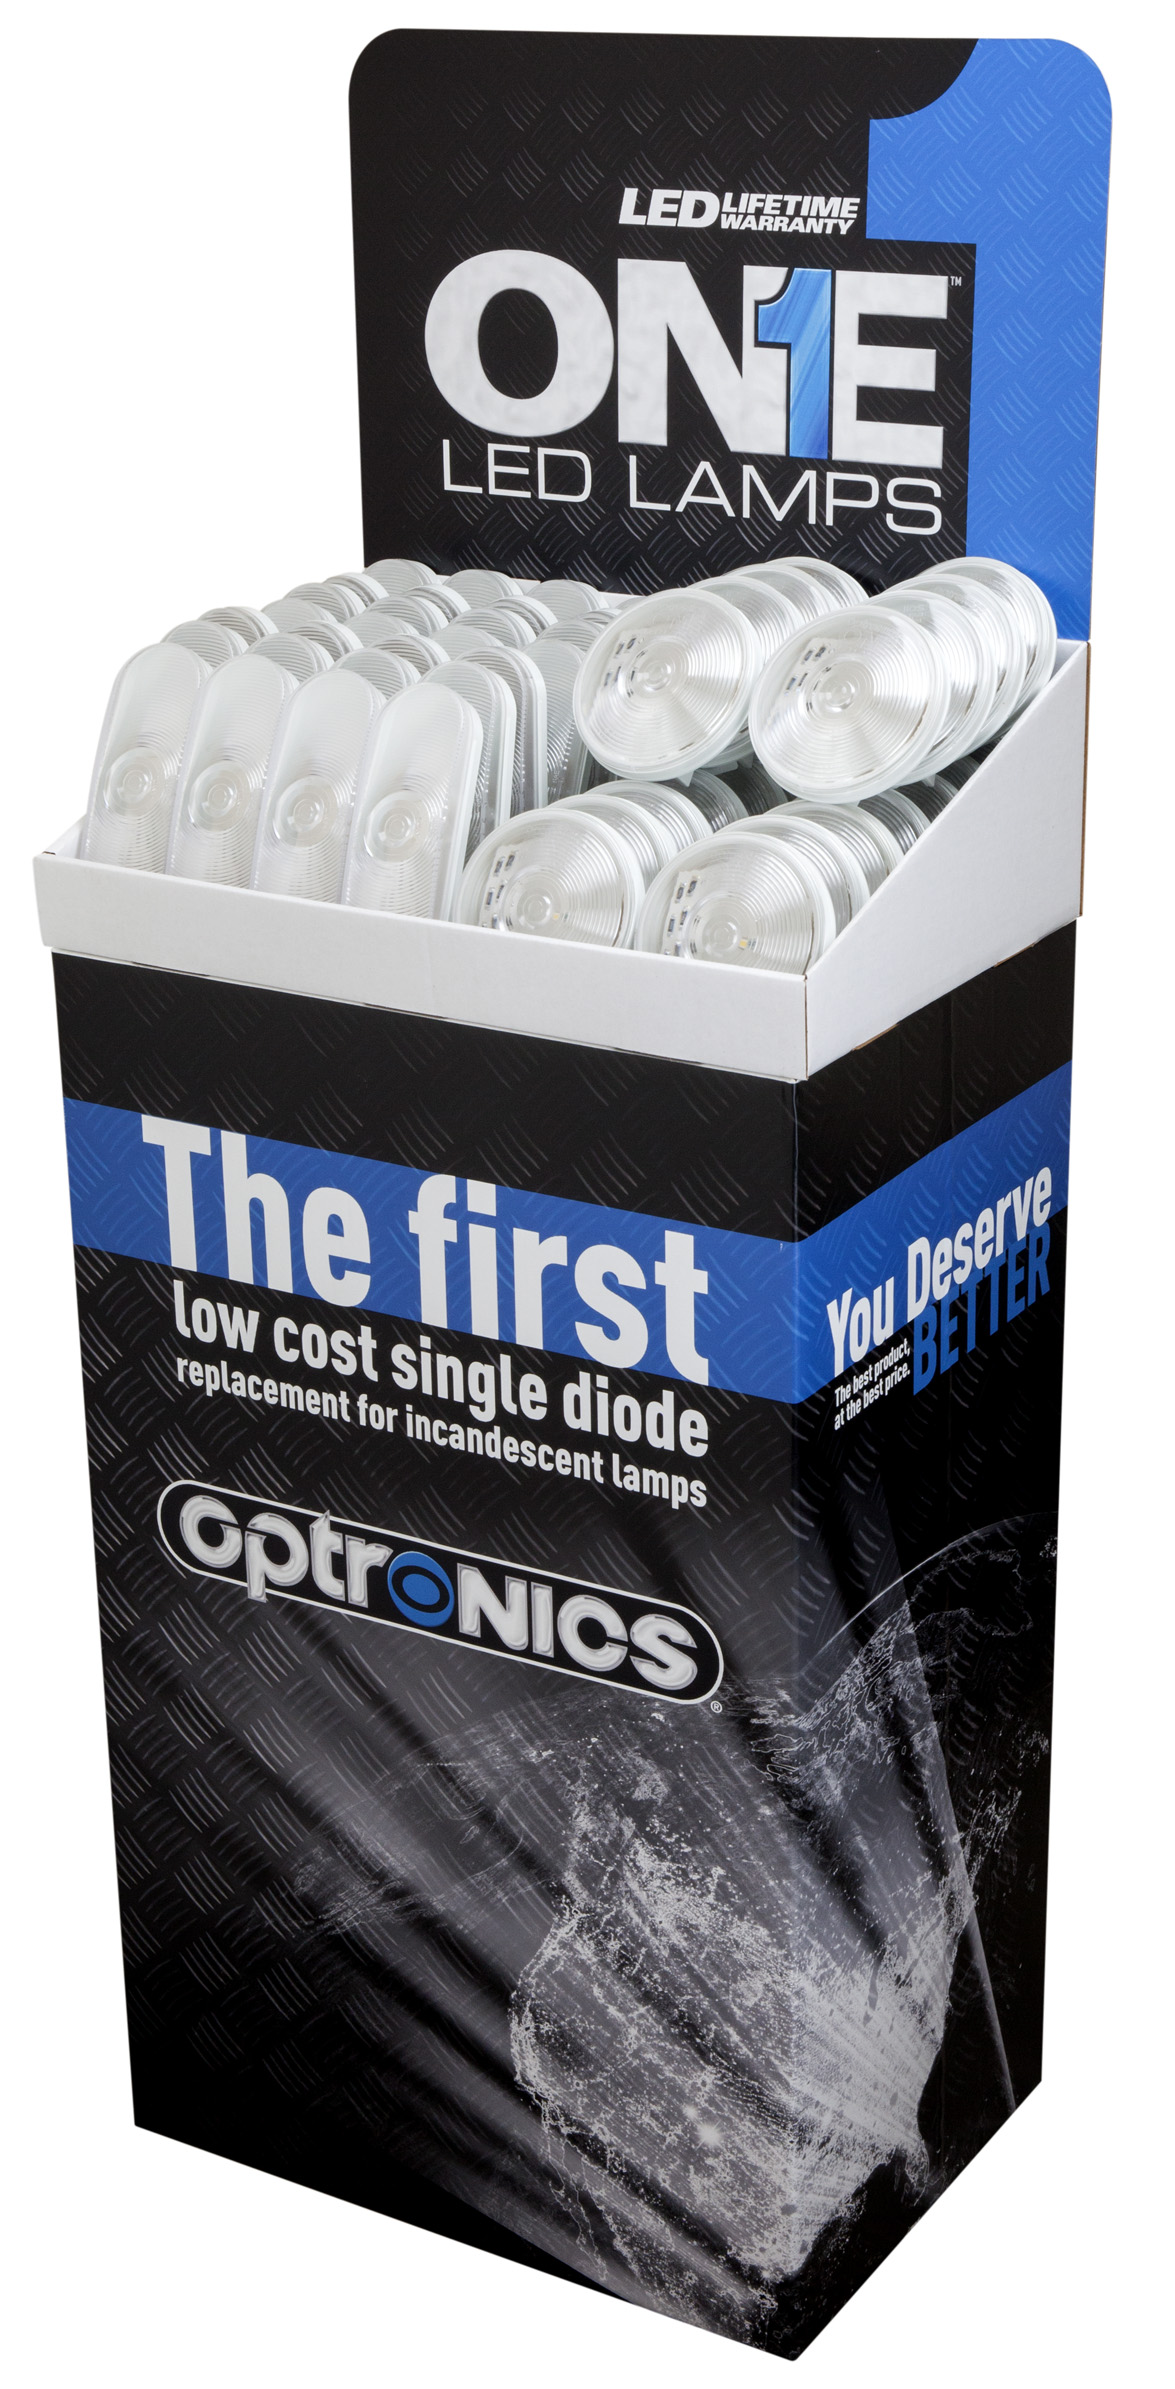 ONE LED Lamps of all kinds can be seen in point-of-purchase displays throughout Optronics’ North American distribution network.